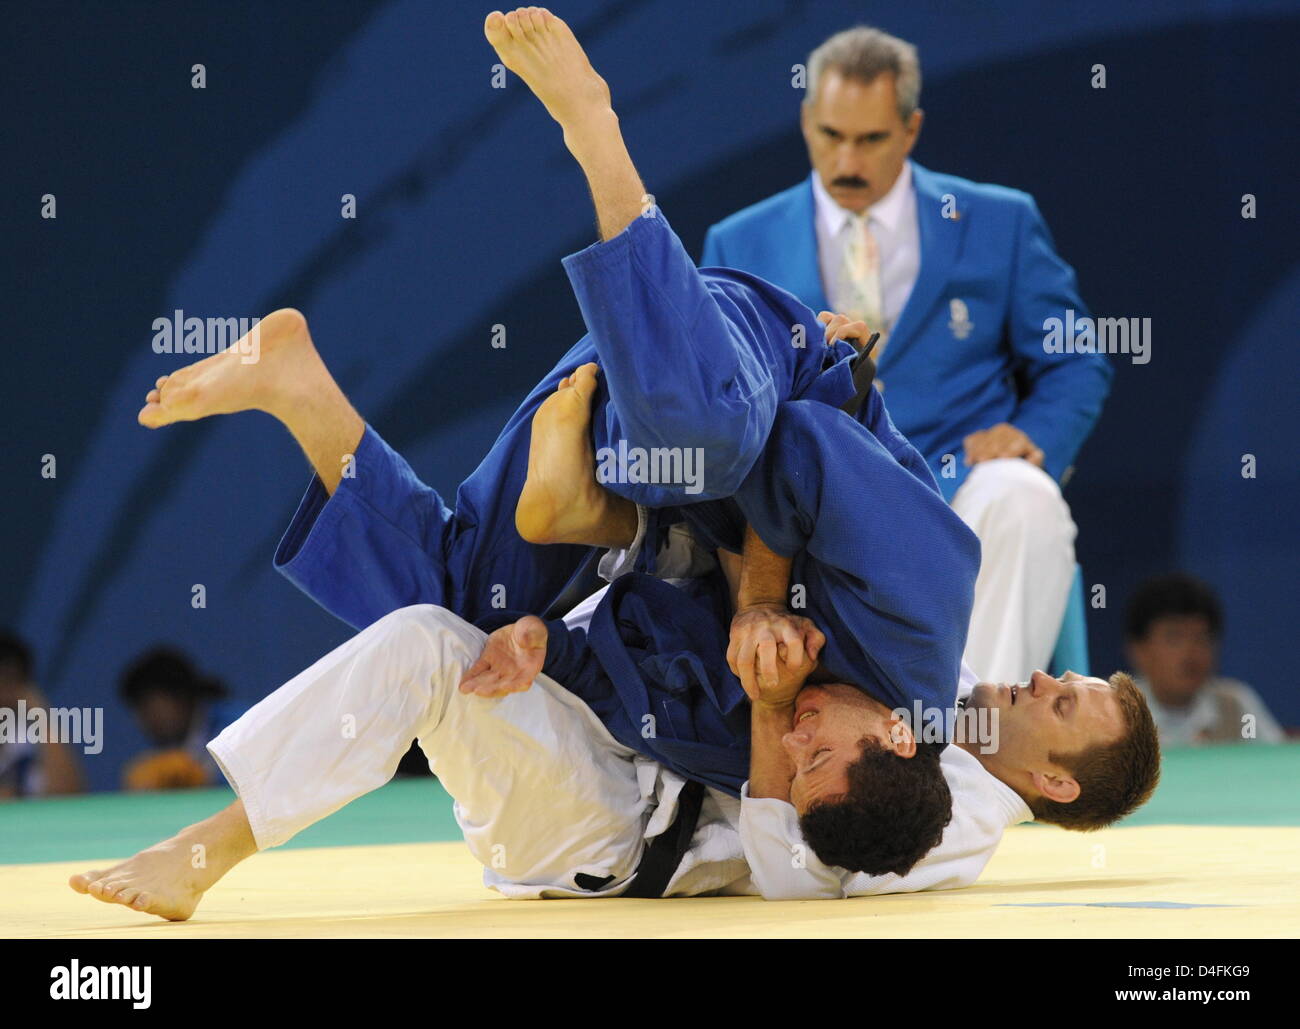 Ole Bischof (white) of Germany wins against Tiago Camilo of Brazil in the preliminary round in the 81 kg category of the men·s judo events in the Beijing Science and Technology University Gymnasium (STG) at the Beijing 2008 Olympic Games, Beijing, China, 12 August 2008. Photo: Peer Grimm dpa ###dpa### Stock Photo